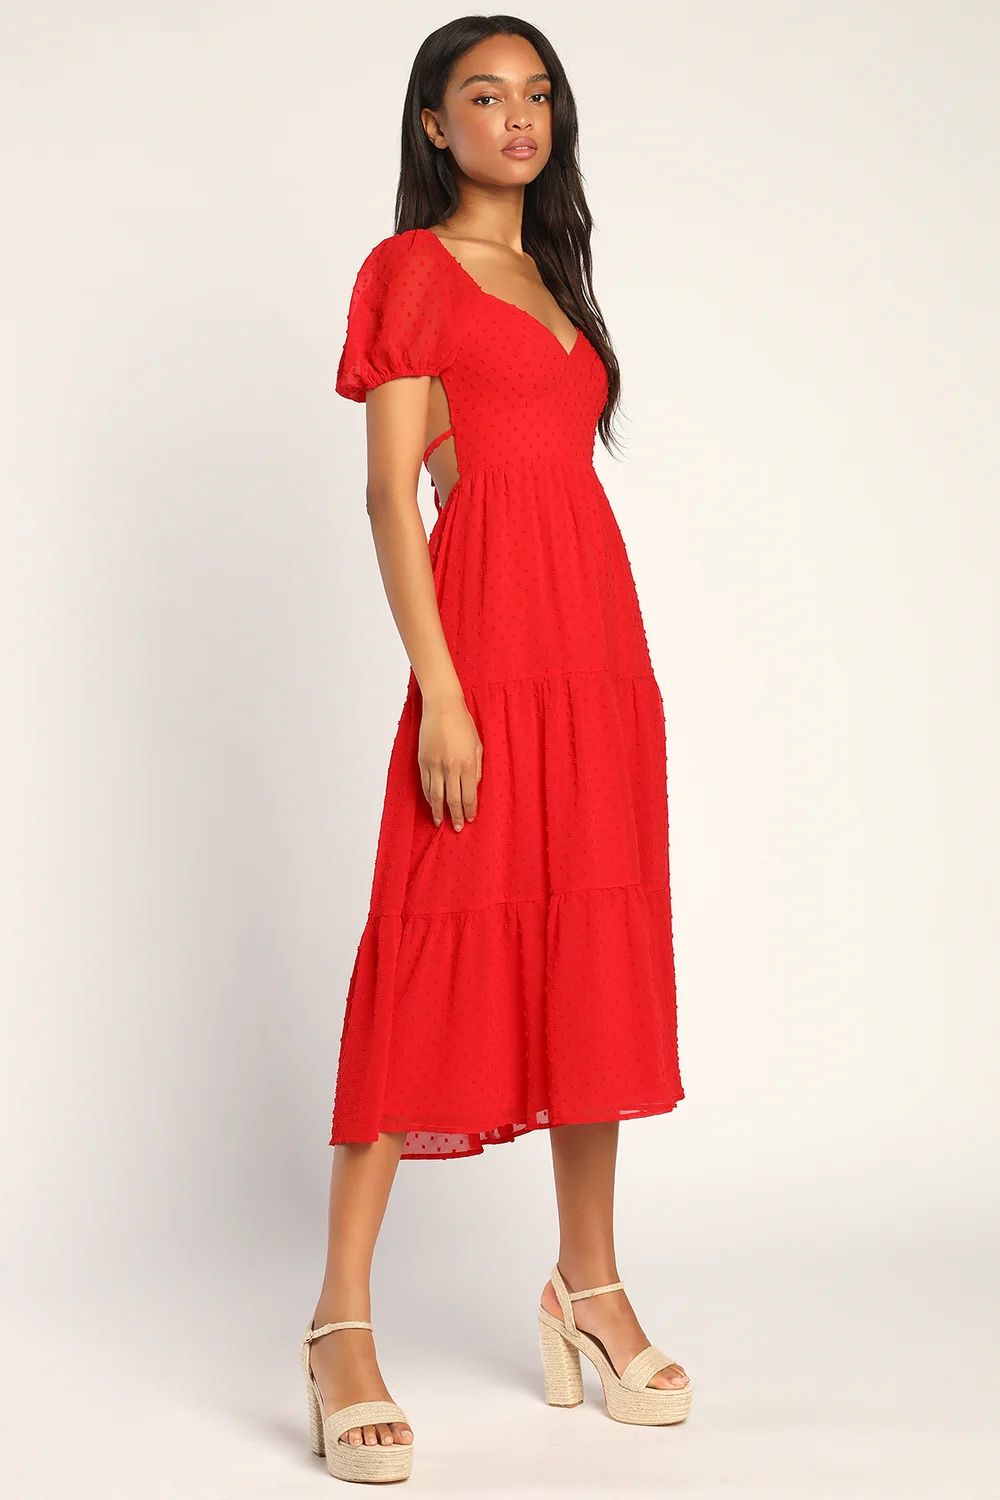 Tier for the Sunshine Red Tiered Backless Clip Dot Midi Dress | Lulus (US)